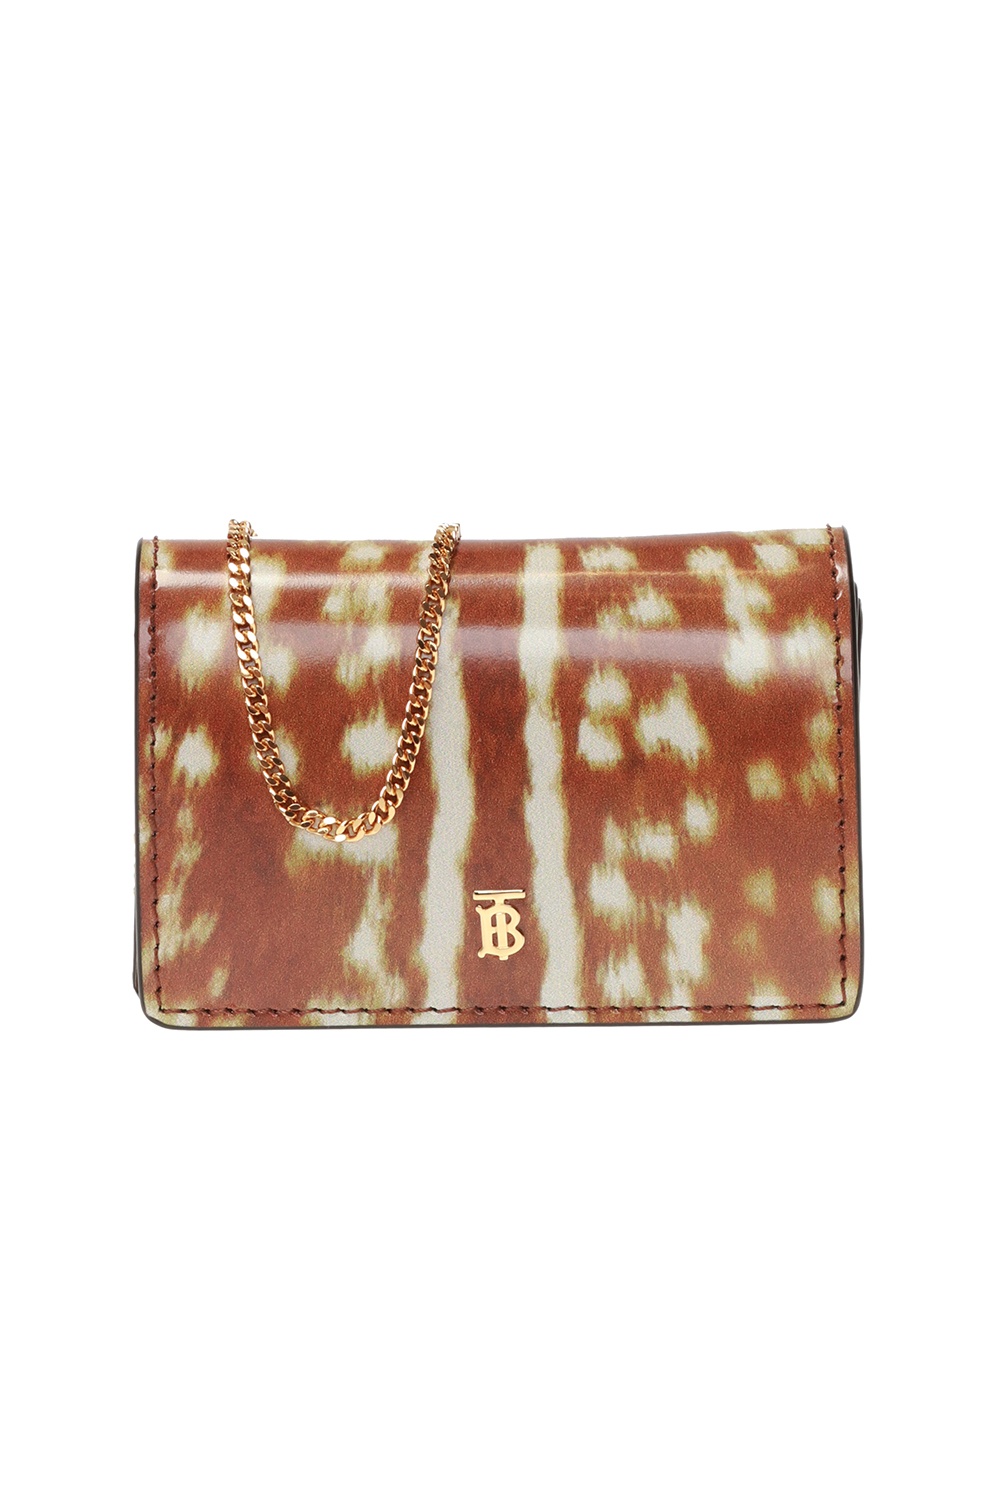 Burberry Card holder on a chain, Women's Accessories